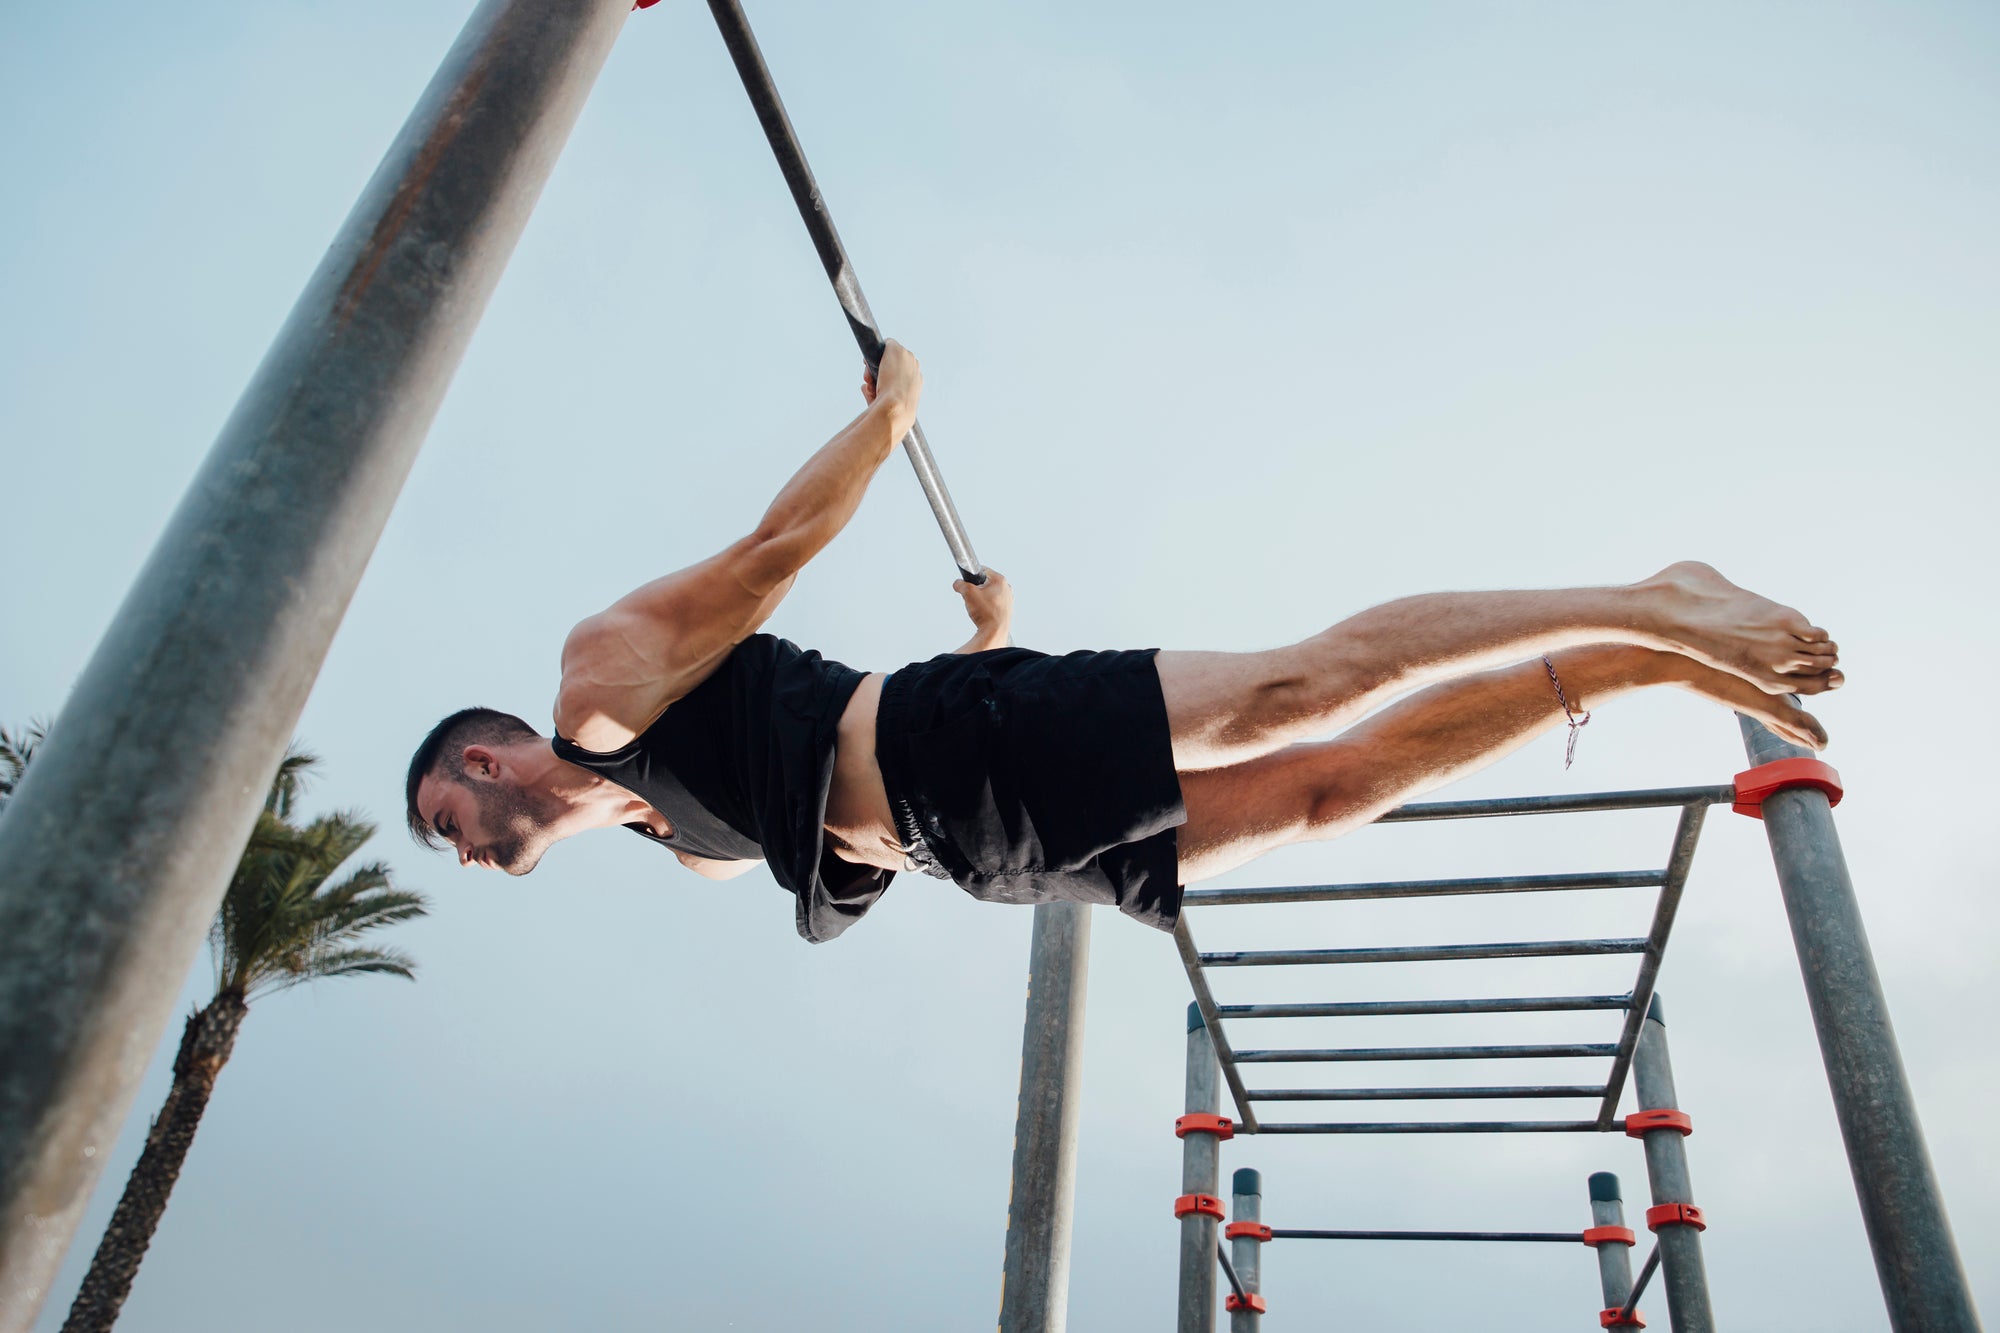 4-Day Calisthenics Workout Plan for Beginners - Steel Supplements